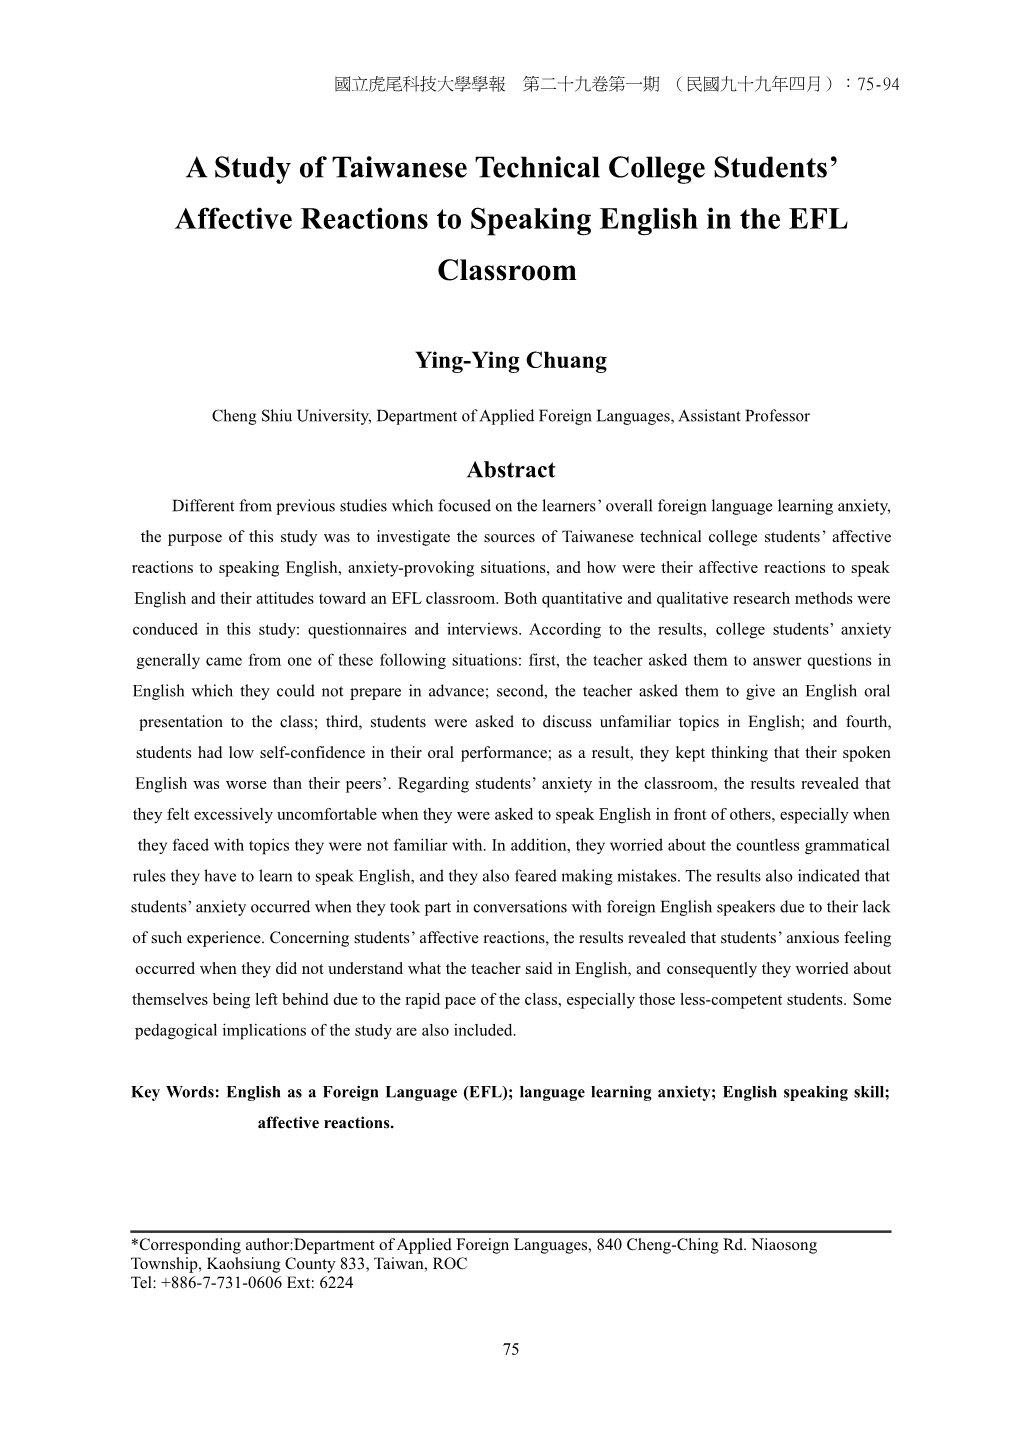 A Study of Taiwanese College Students Affective Reactions to Speaking English in the EFL